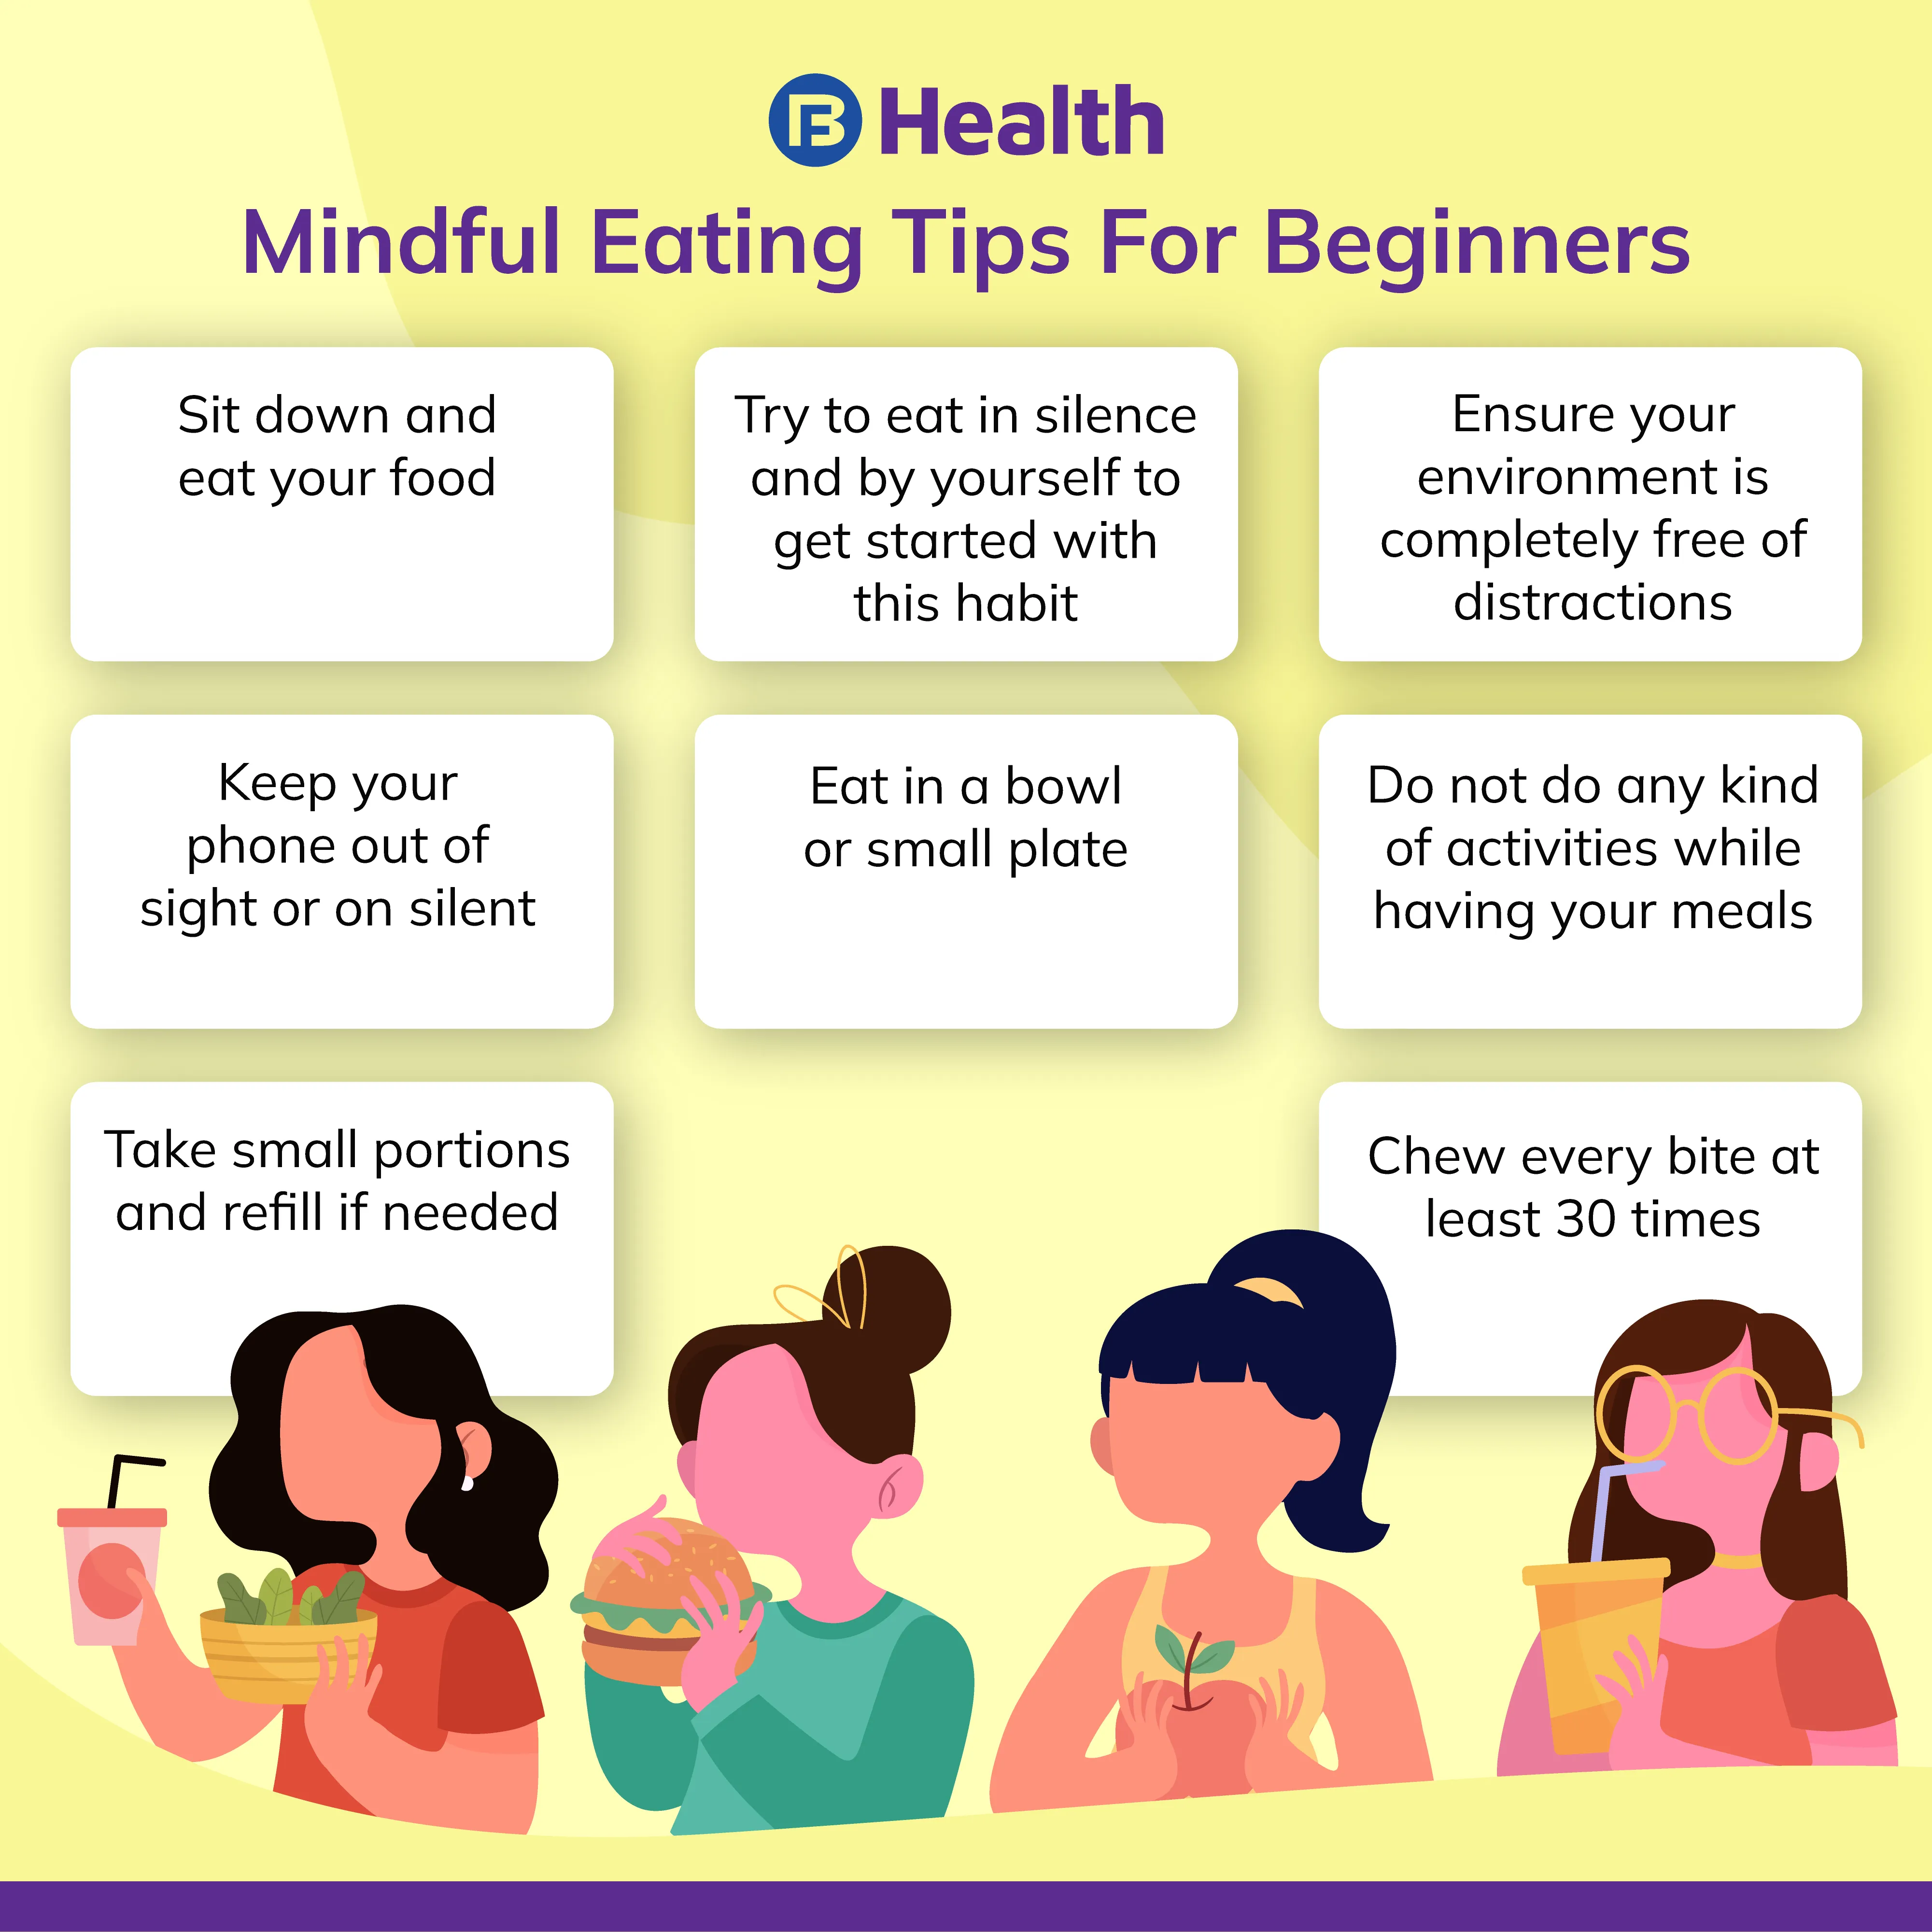 Tips for mindful eating